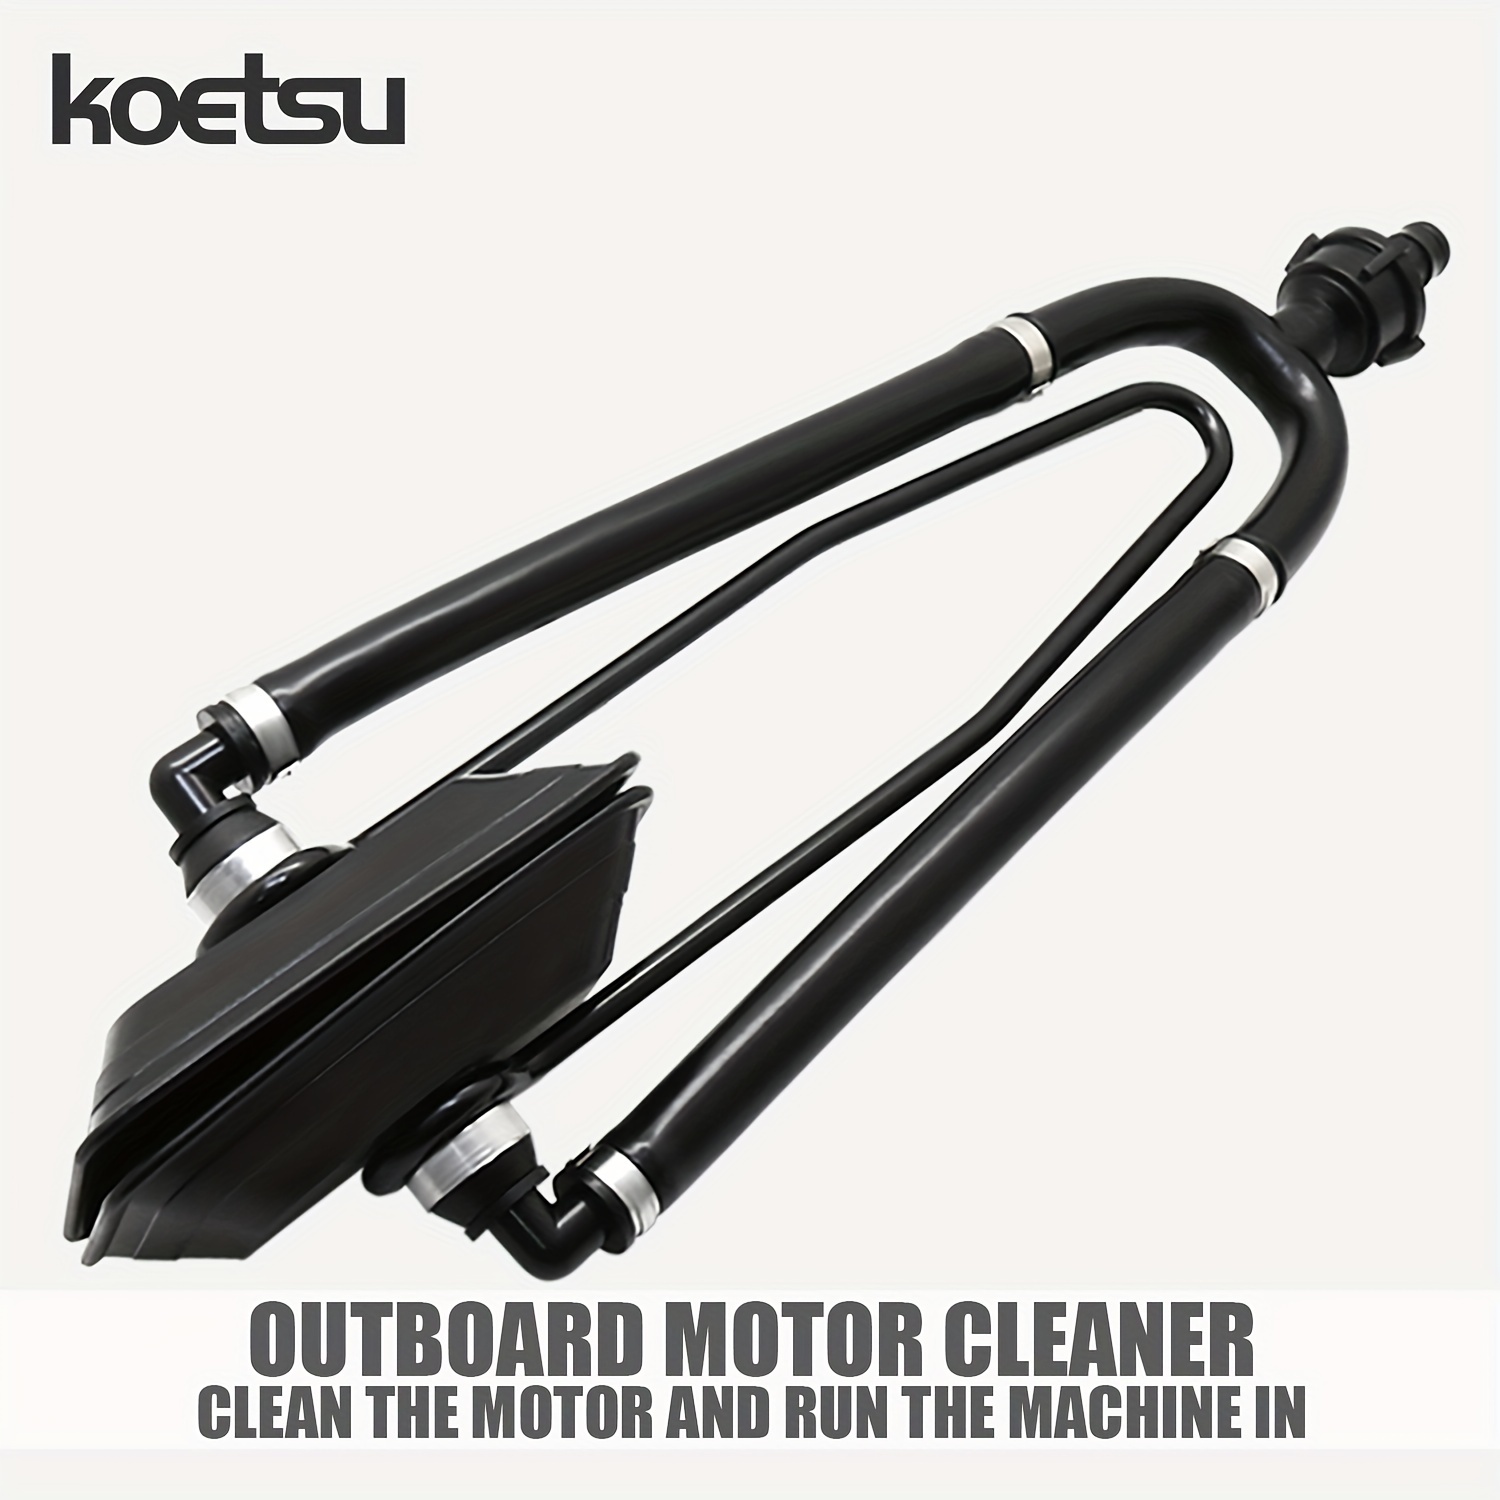 

Koetsu Marine Engine Flusher - Durable Nylon, Non-electric Outboard Motor Water Flush Tool For Boats